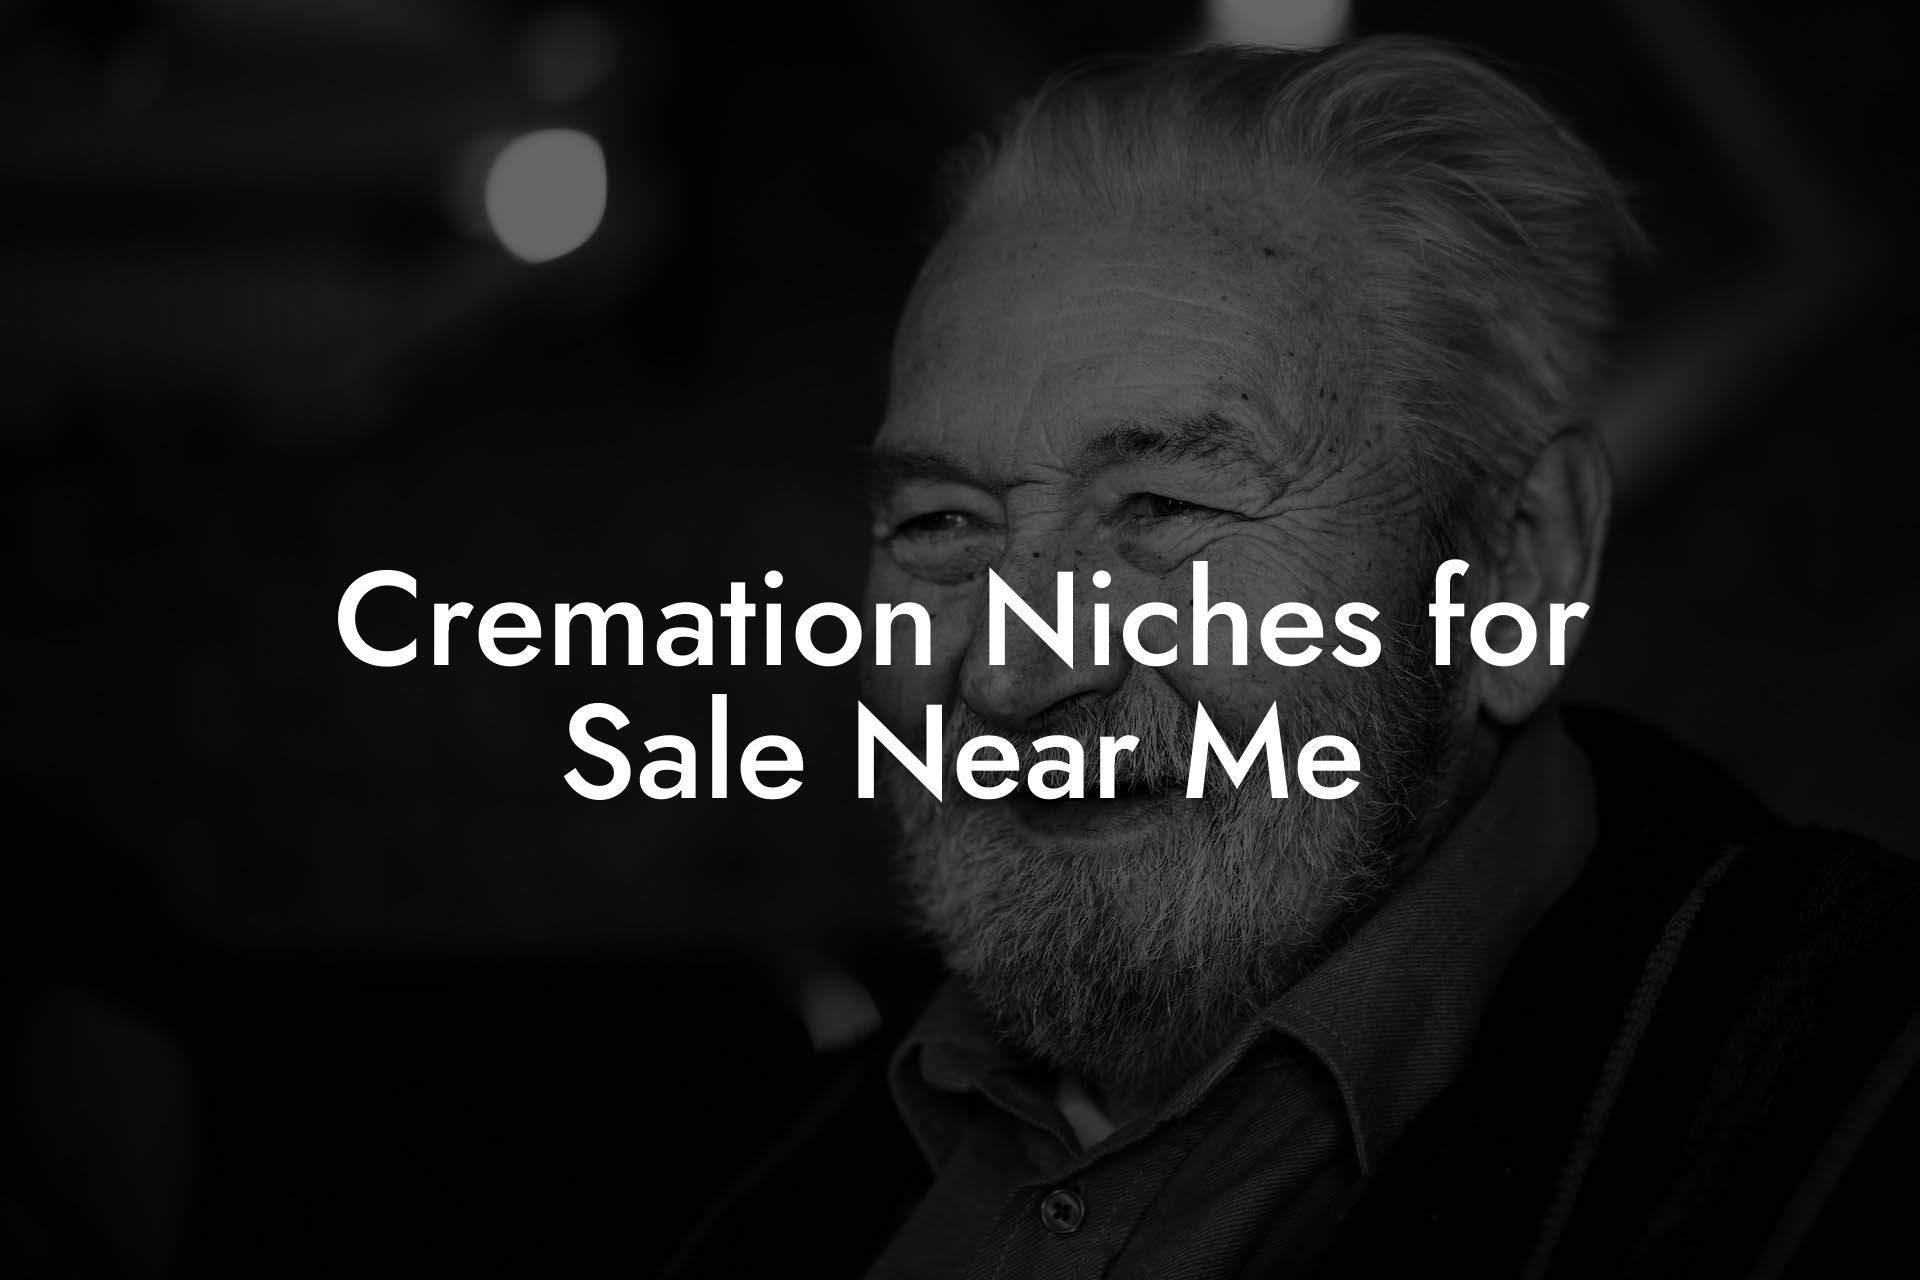 Cremation Niches for Sale Near Me